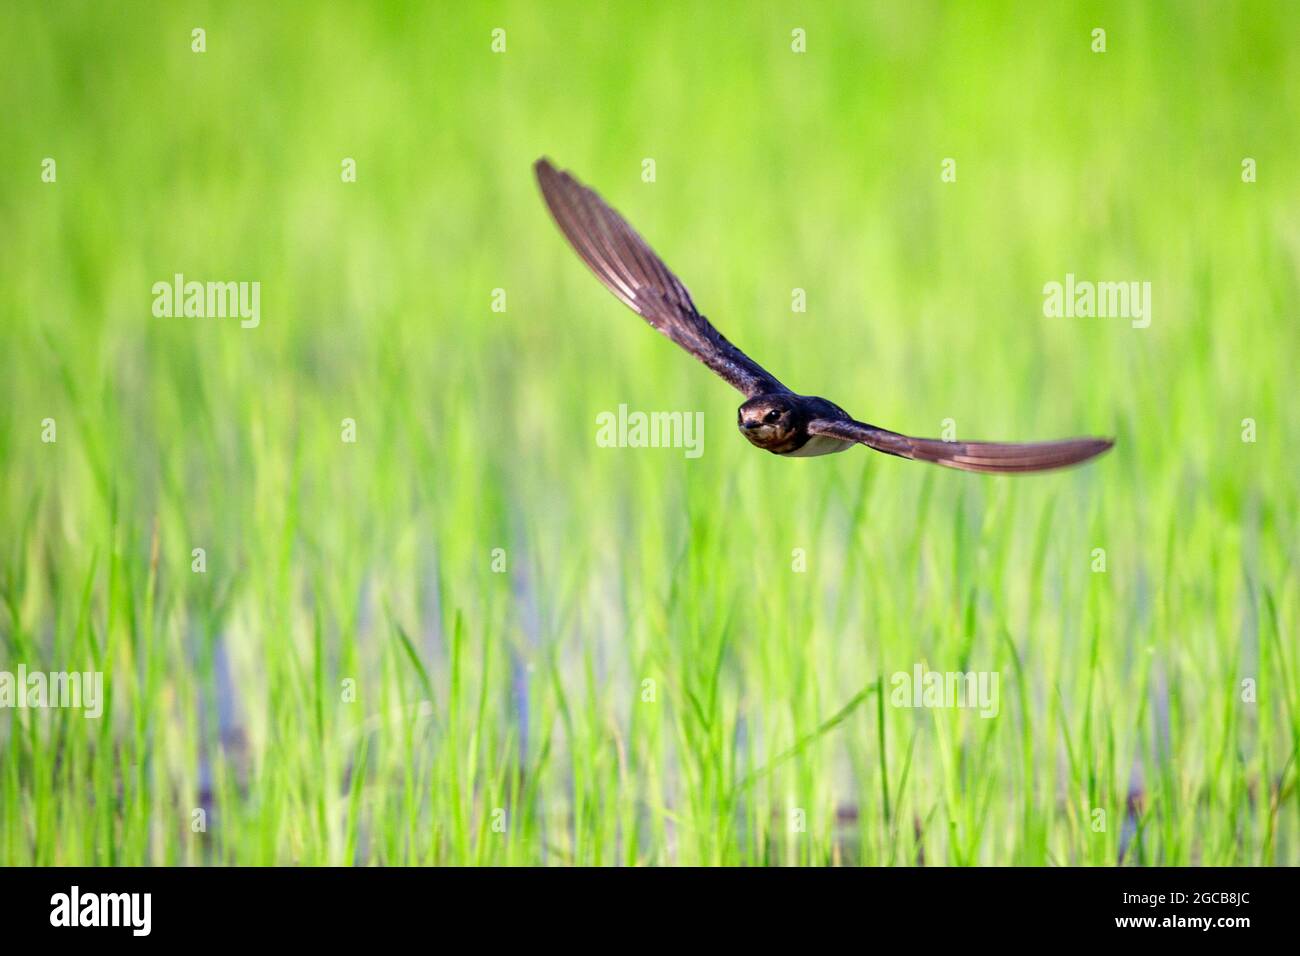 Image of barn swallow flying in the middle of a field on a natural background. Bird. Animal. Stock Photo